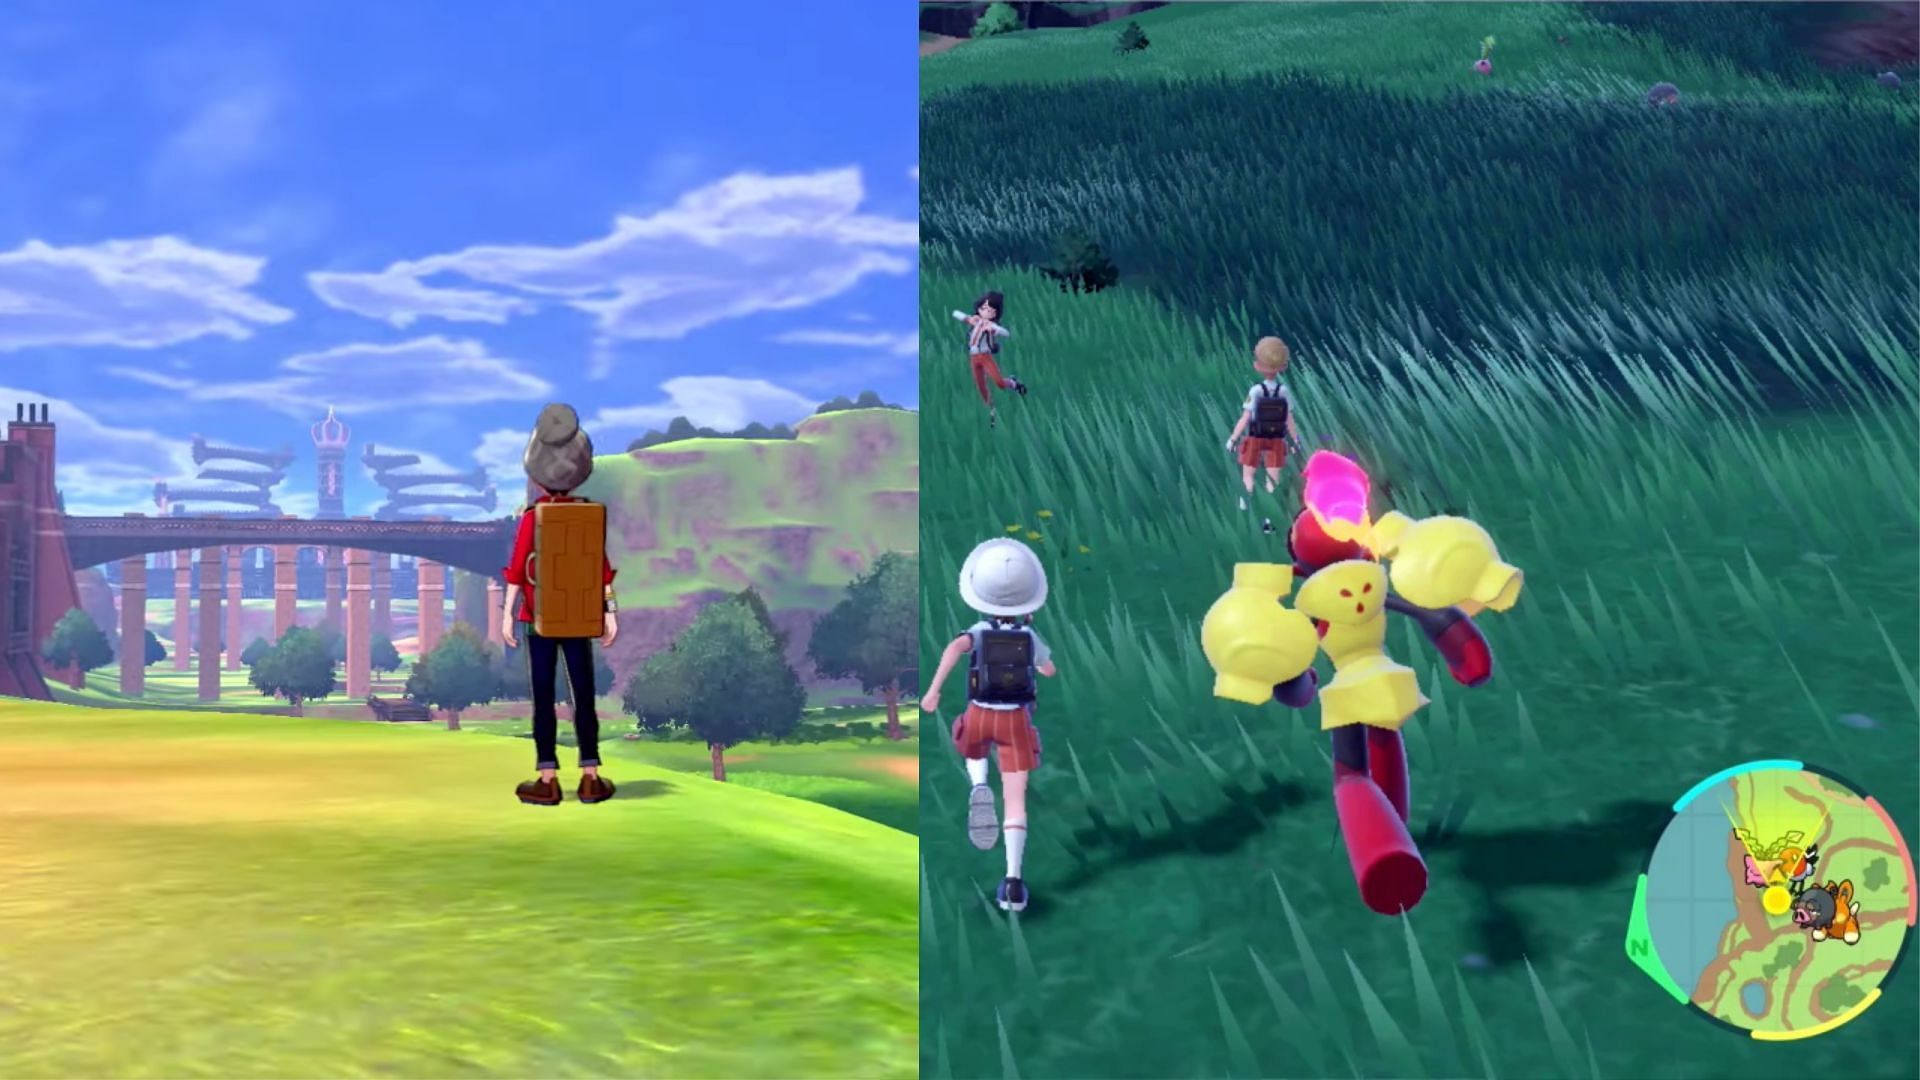 Pokemon Sword and Shield differences